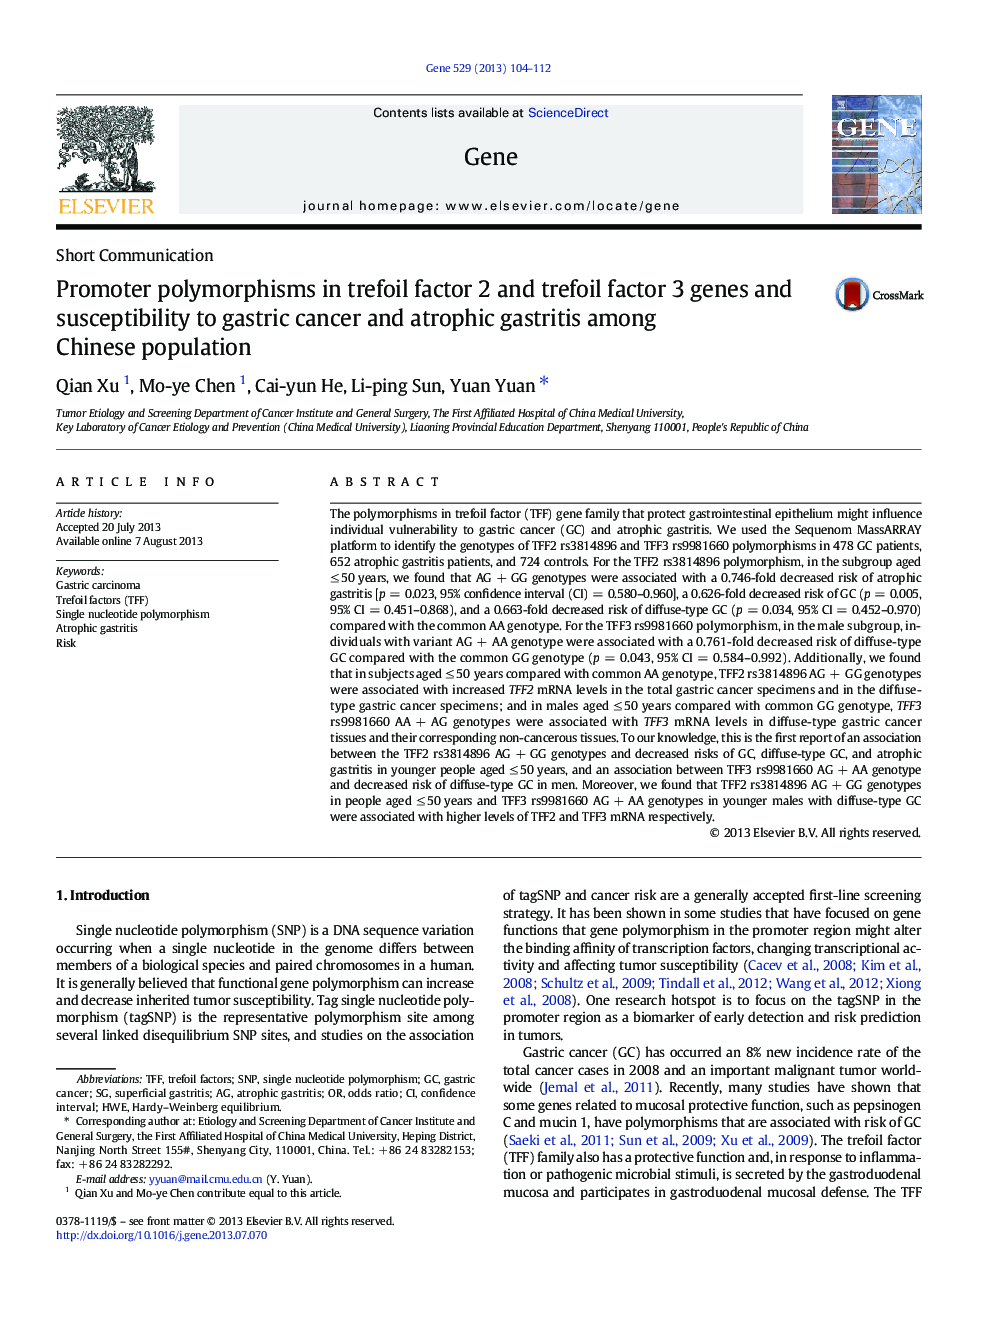 Promoter polymorphisms in trefoil factor 2 and trefoil factor 3 genes and susceptibility to gastric cancer and atrophic gastritis among Chinese population